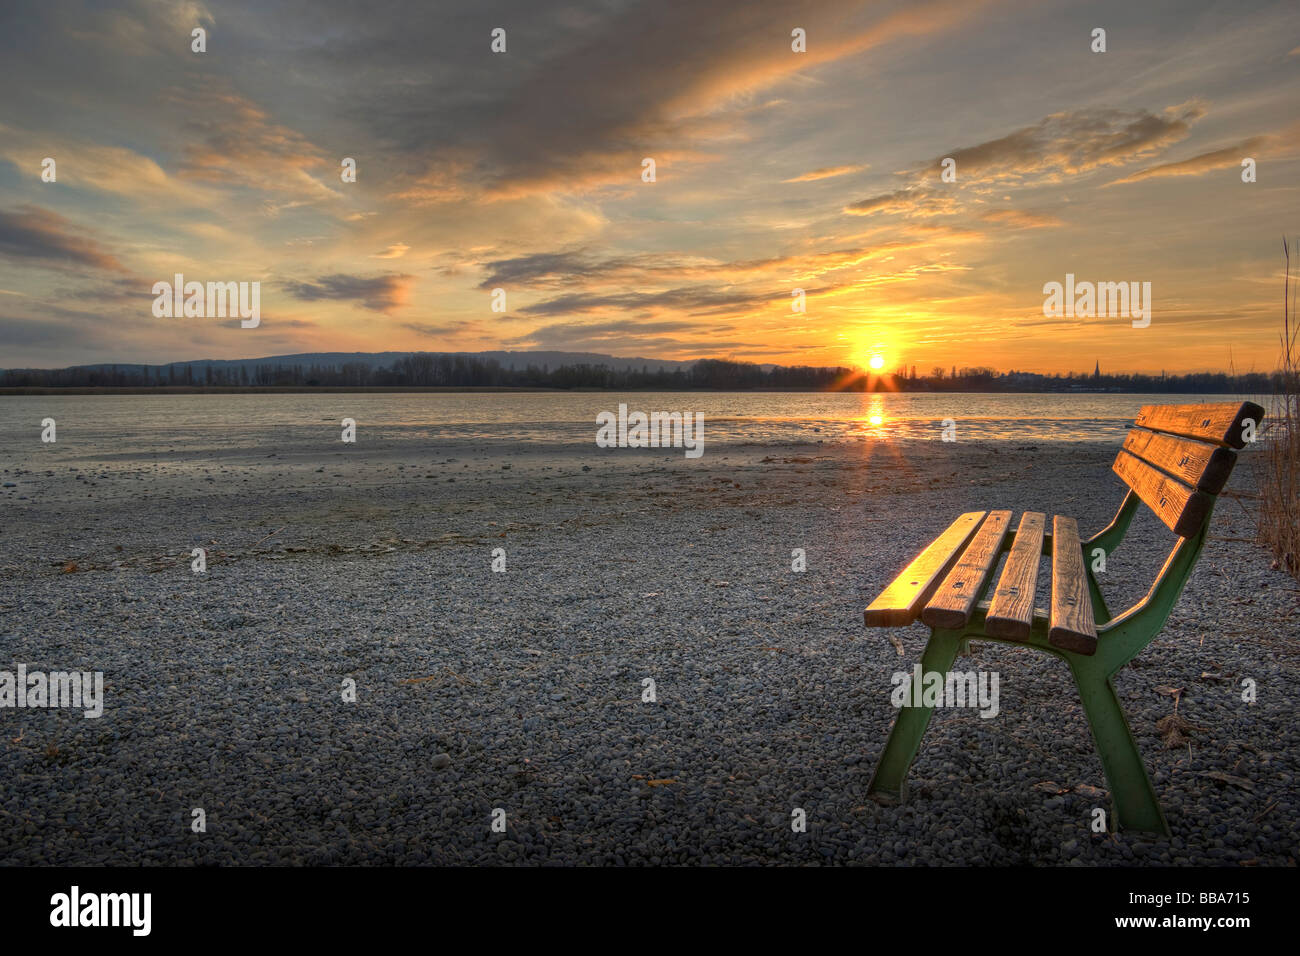 Bench at sunset, Lake Constance, Markelfingen, Radolfzell, County of Constance, Baden-Wurttemberg, Germany, Europe Stock Photo